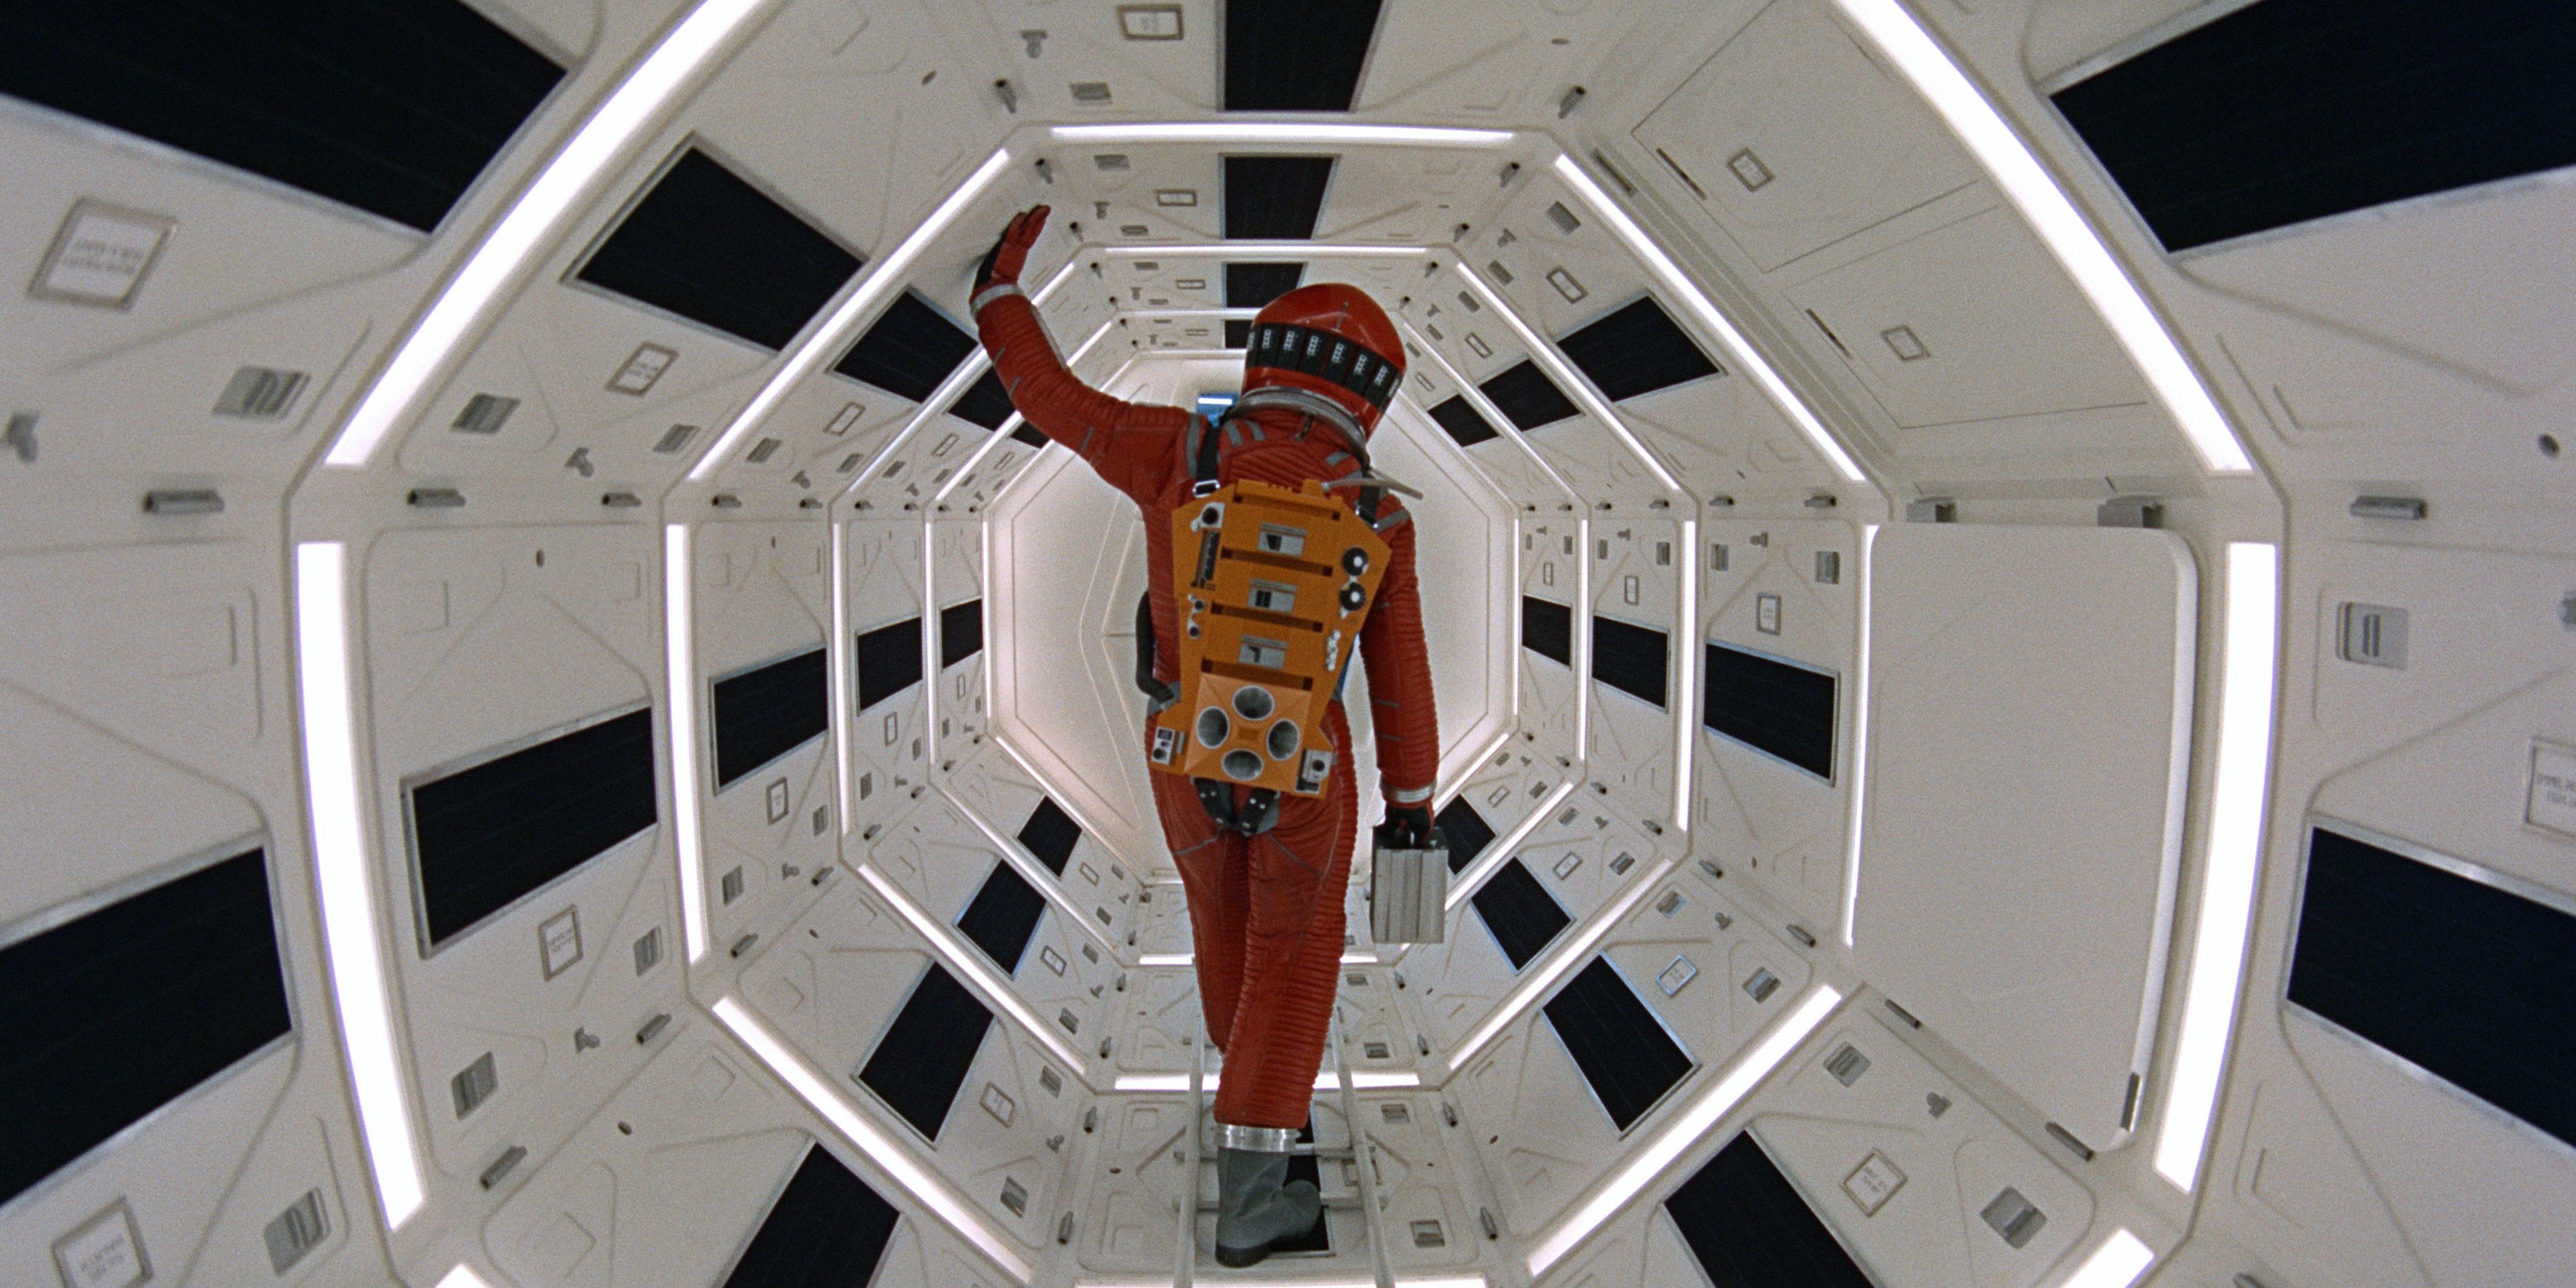 Iconic footage from 2001: A Space Odyssey, showing Keir Dullea as an astronaut inside a glowing spaceship